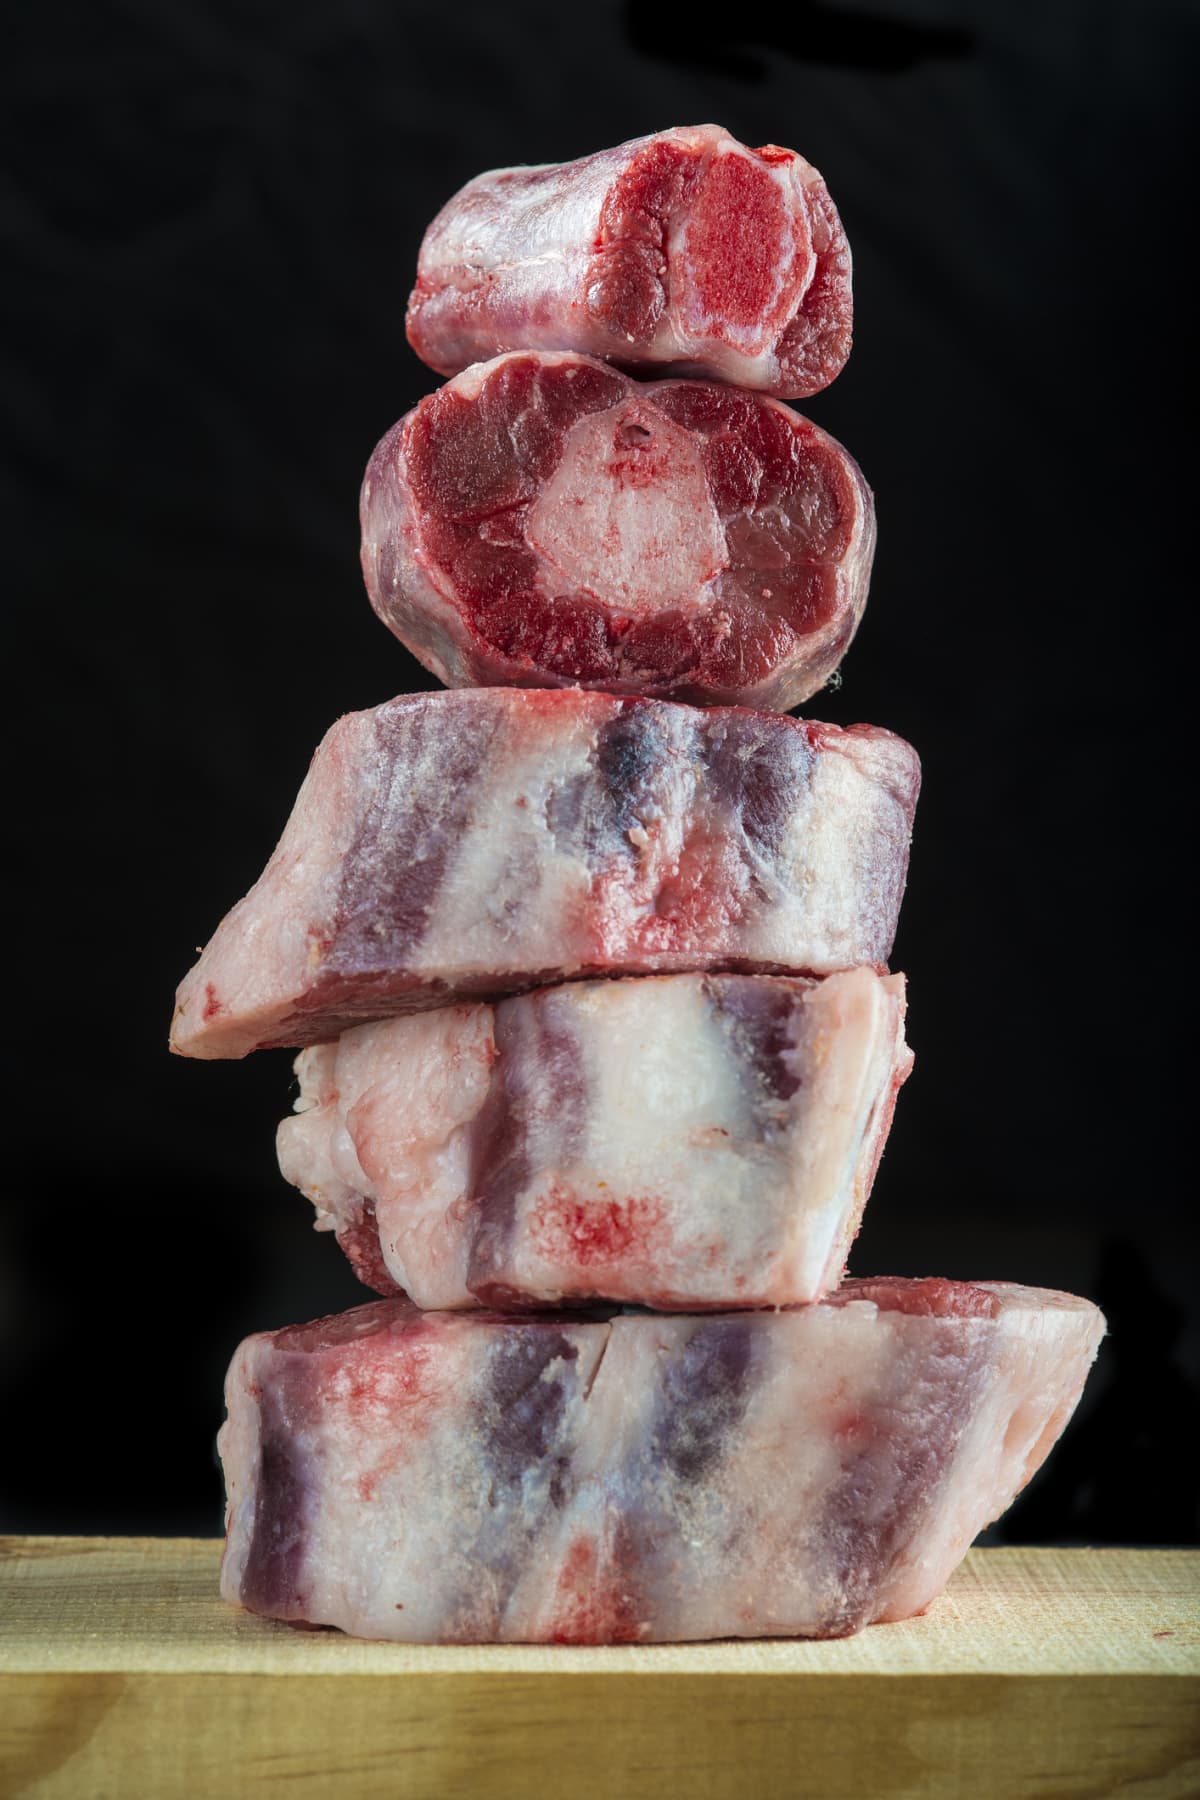 Fresh and raw oxtail cut on the cutting board isolated on a black background